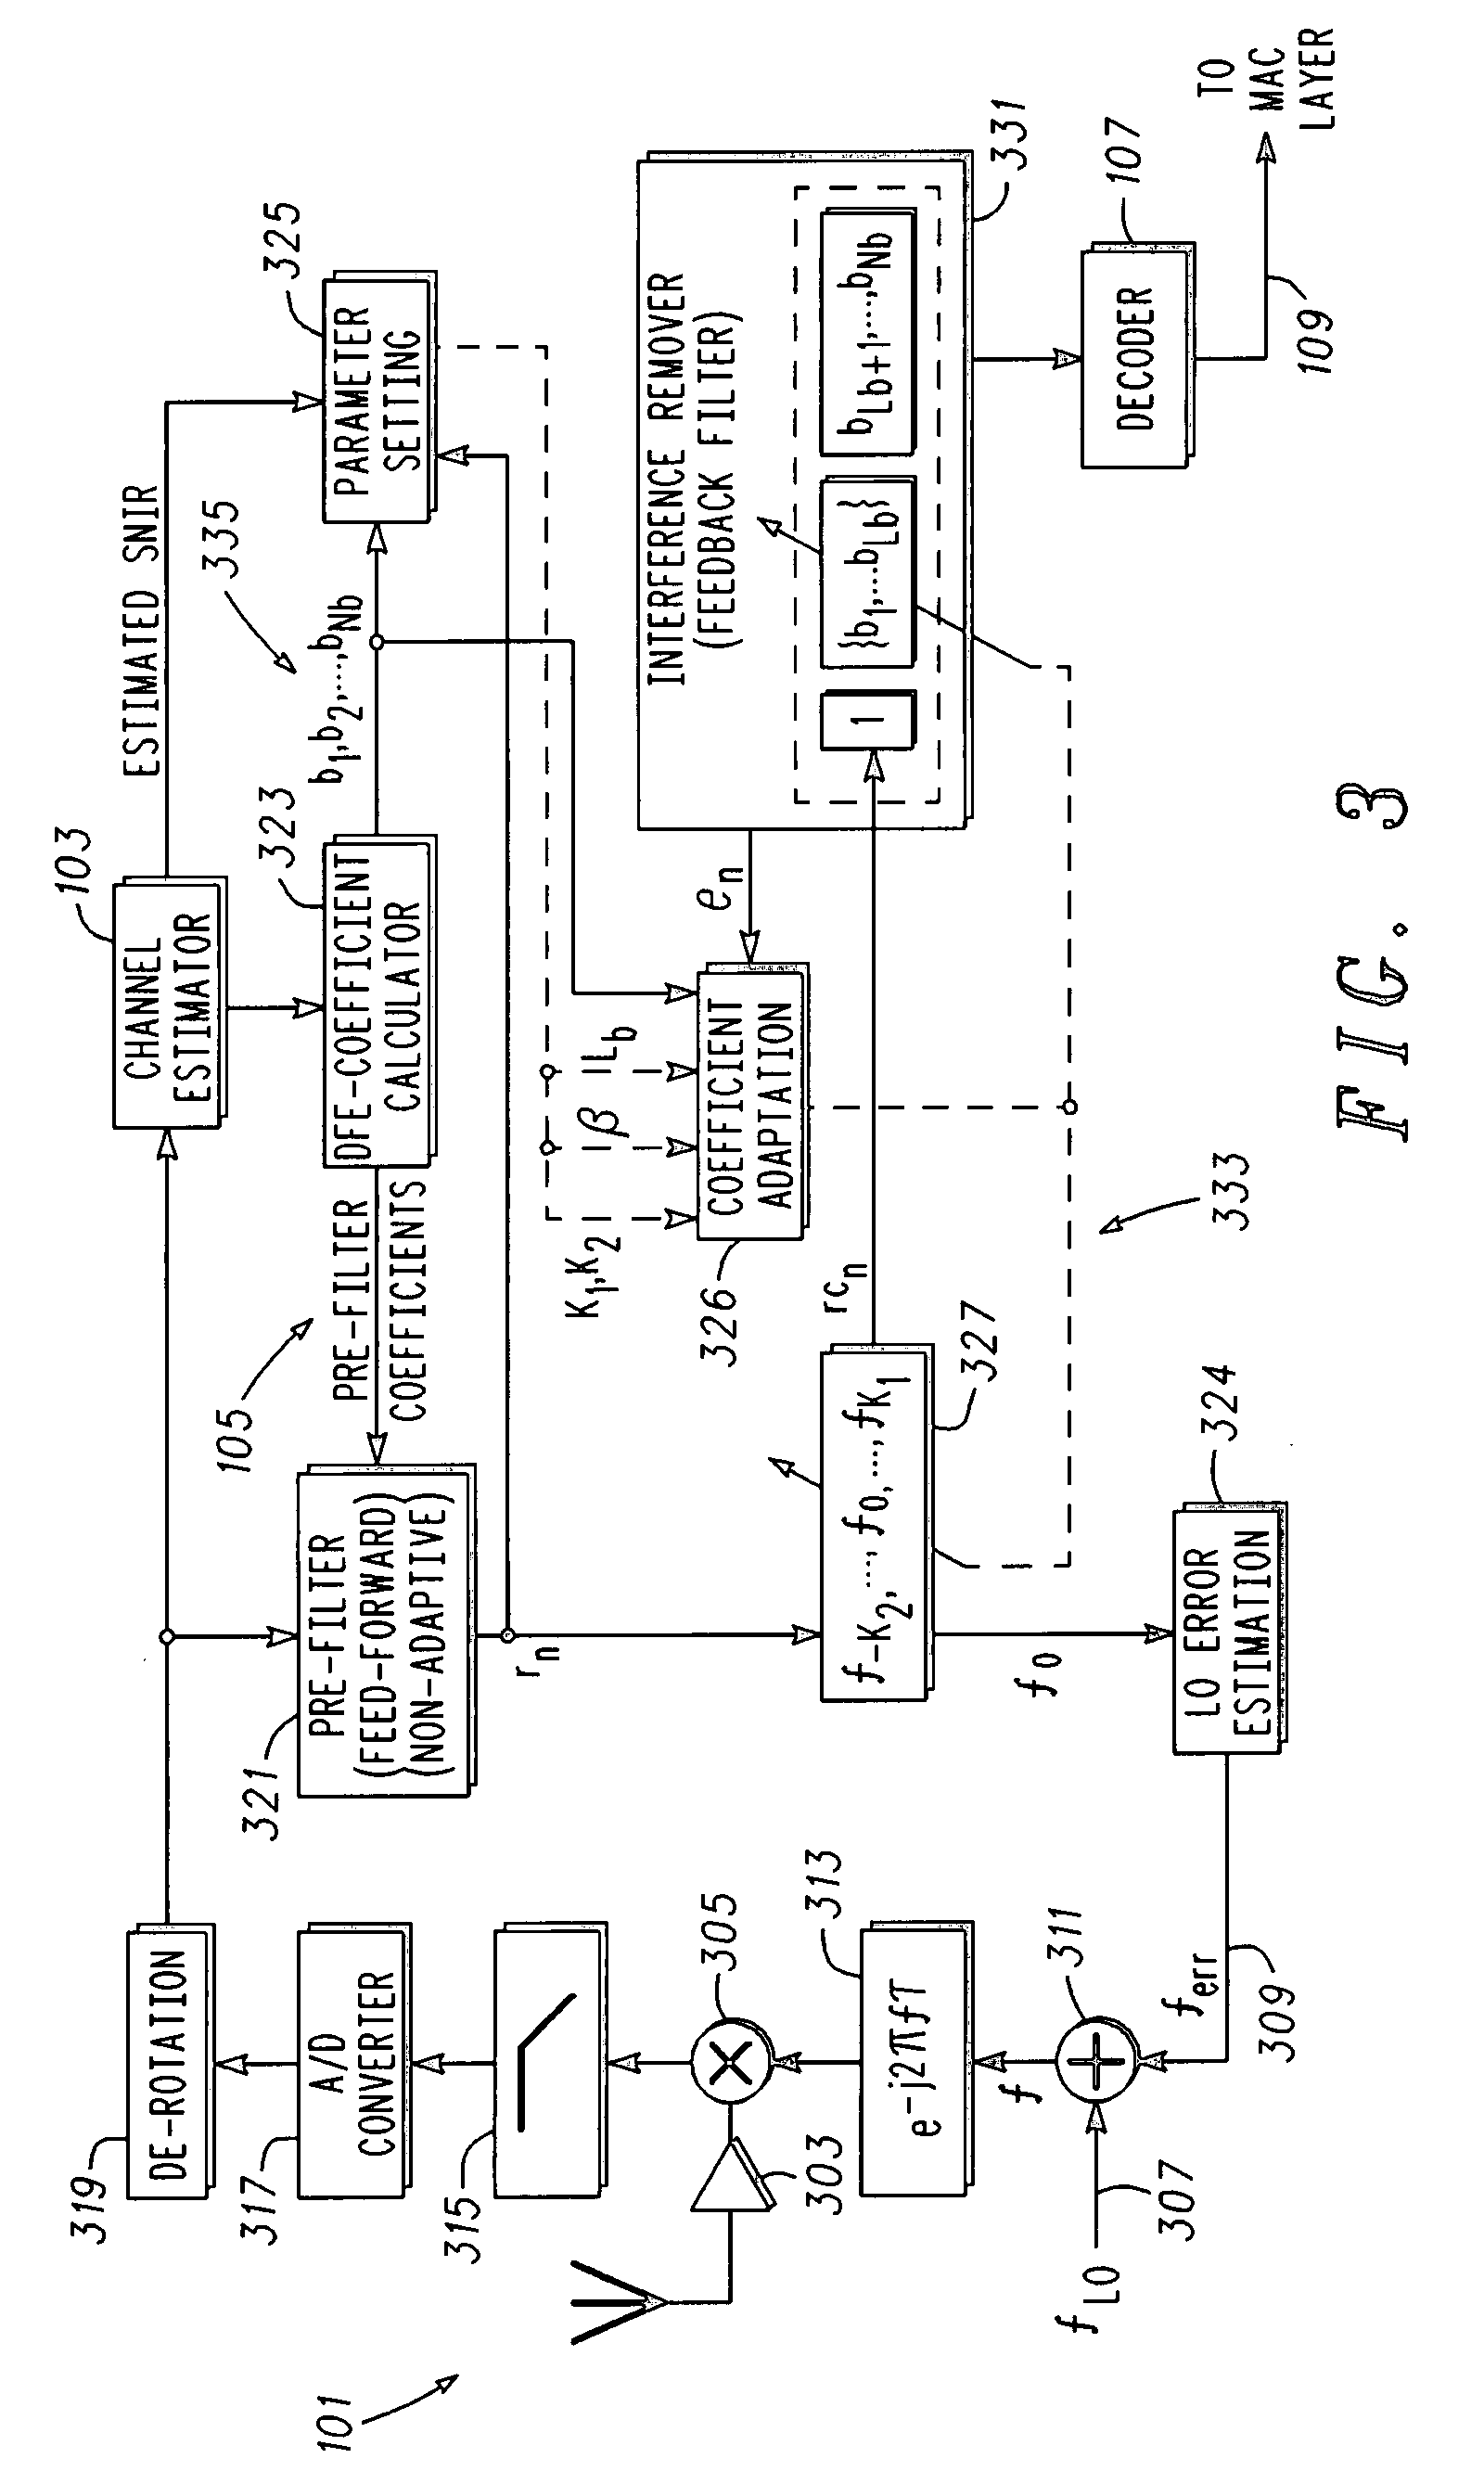 Adaptive equalizer for communication channels